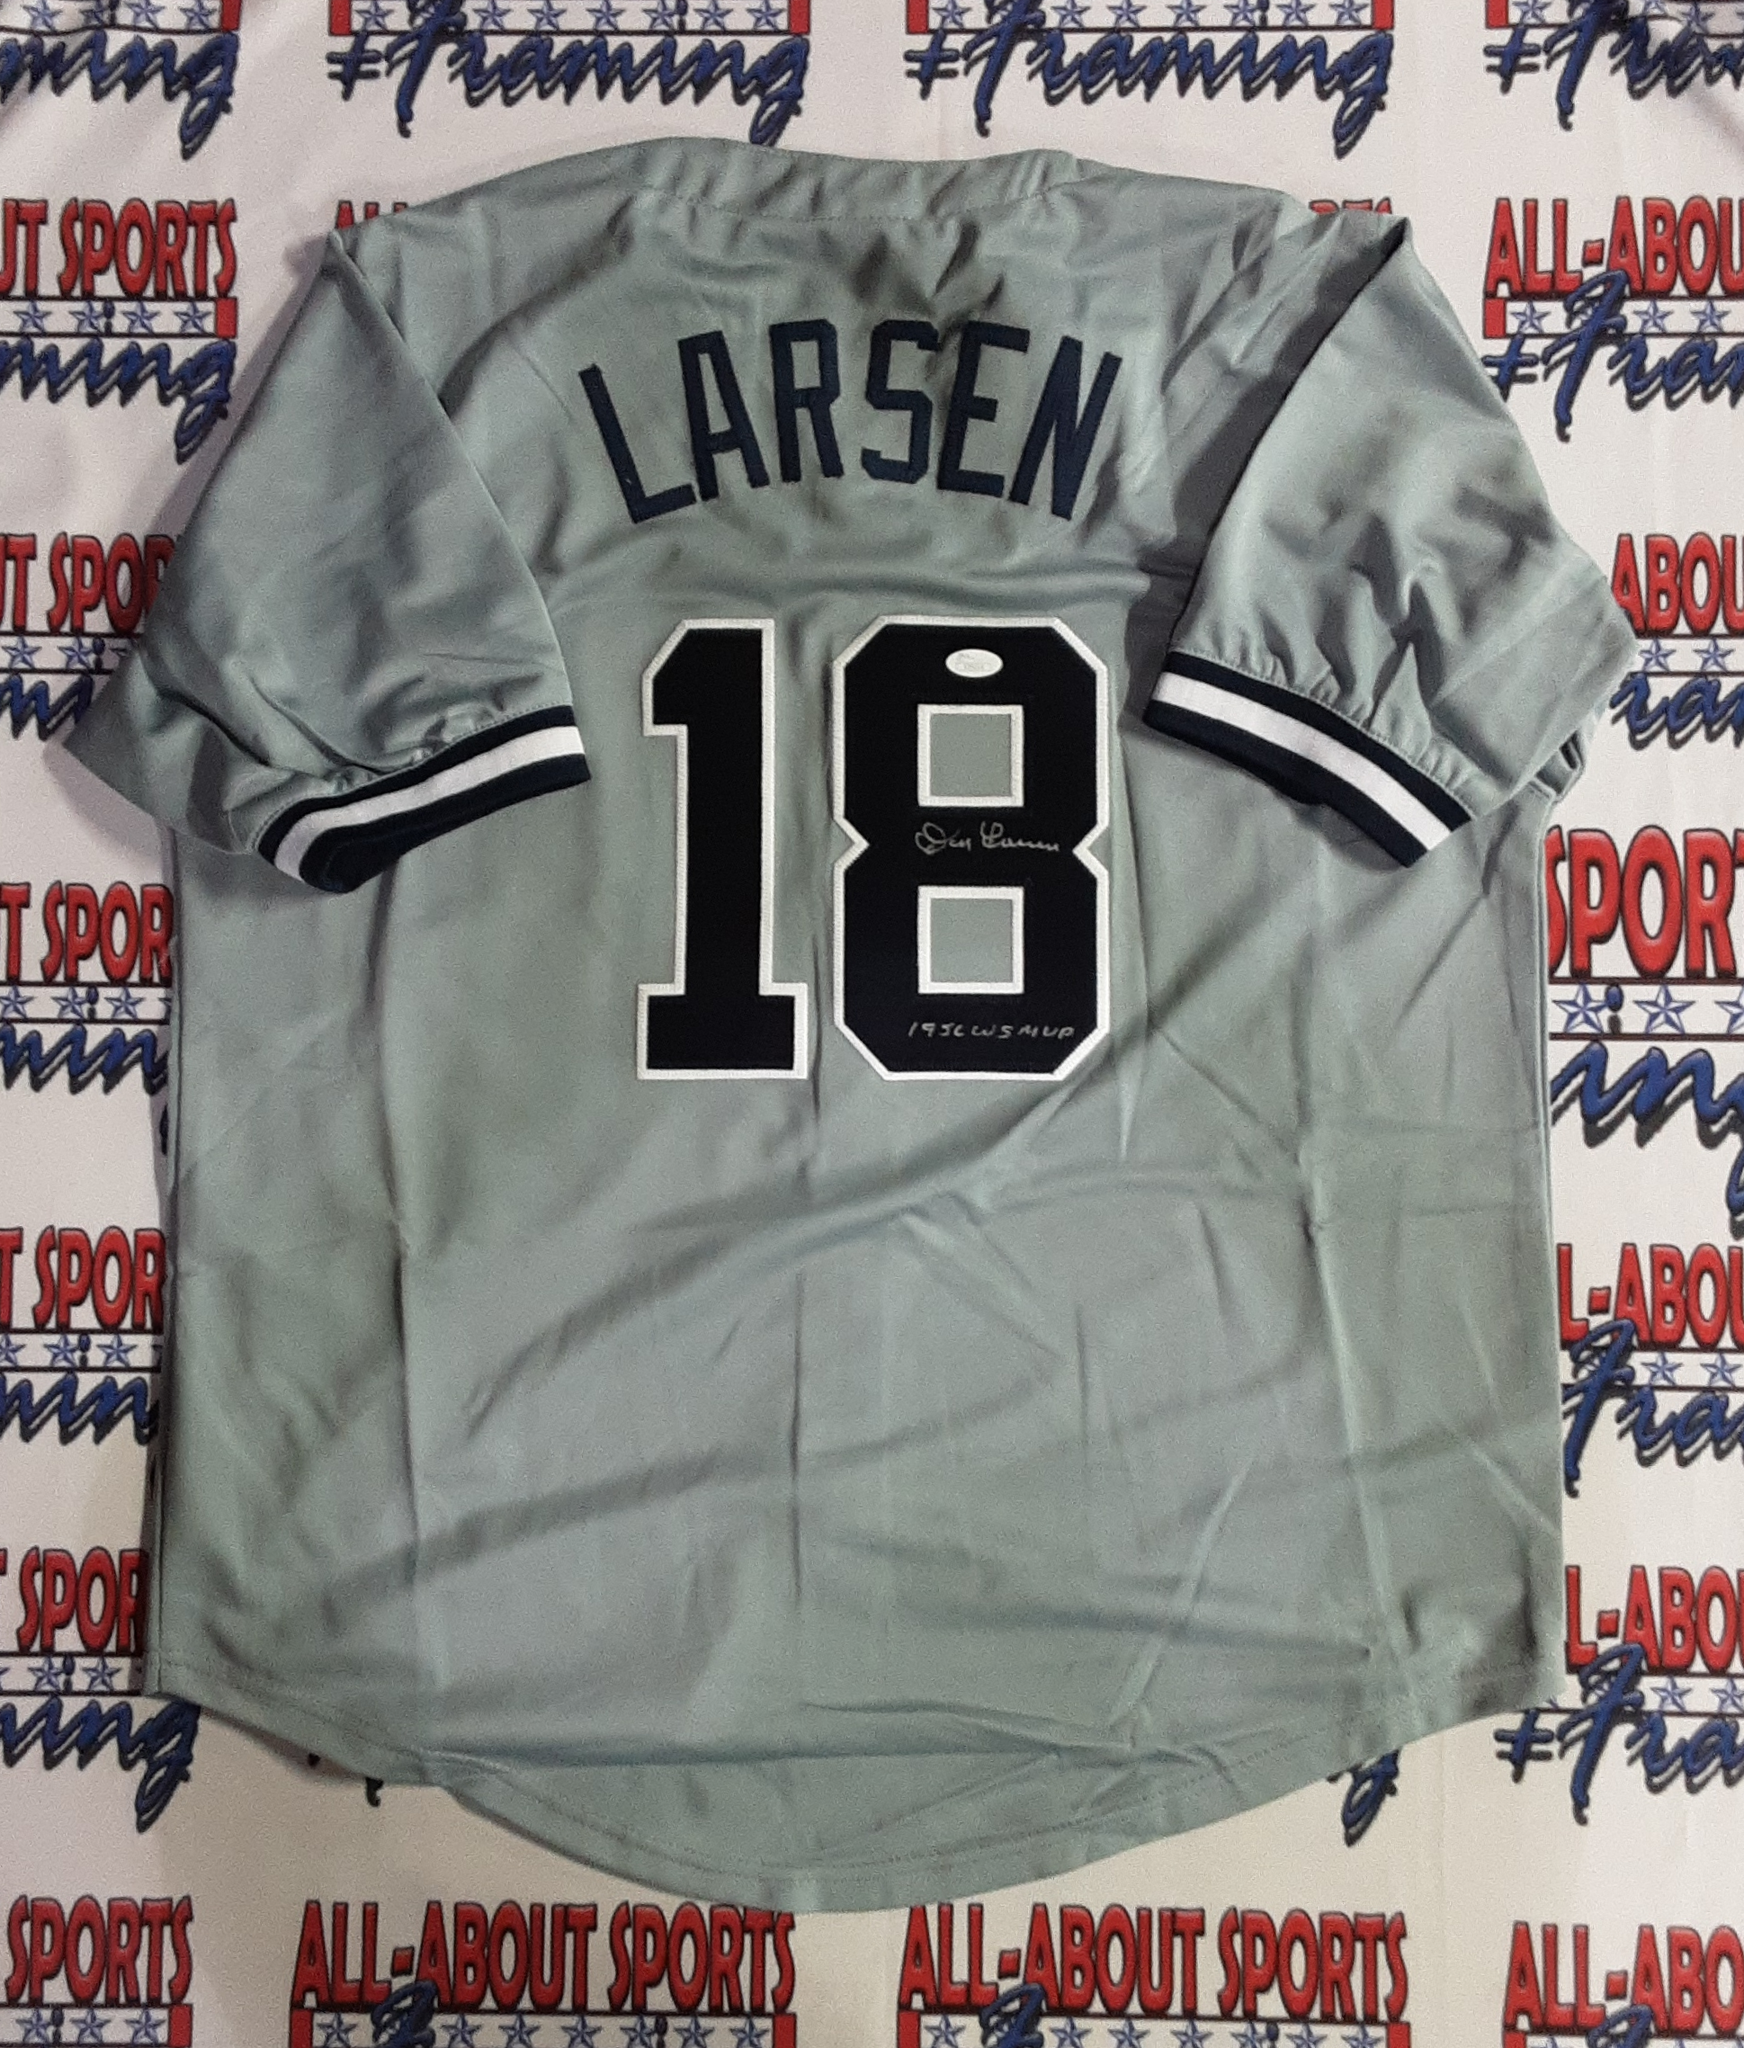 Don Larsen Authentic Signed Pro Style Jersey Autographed with Inscription JSA